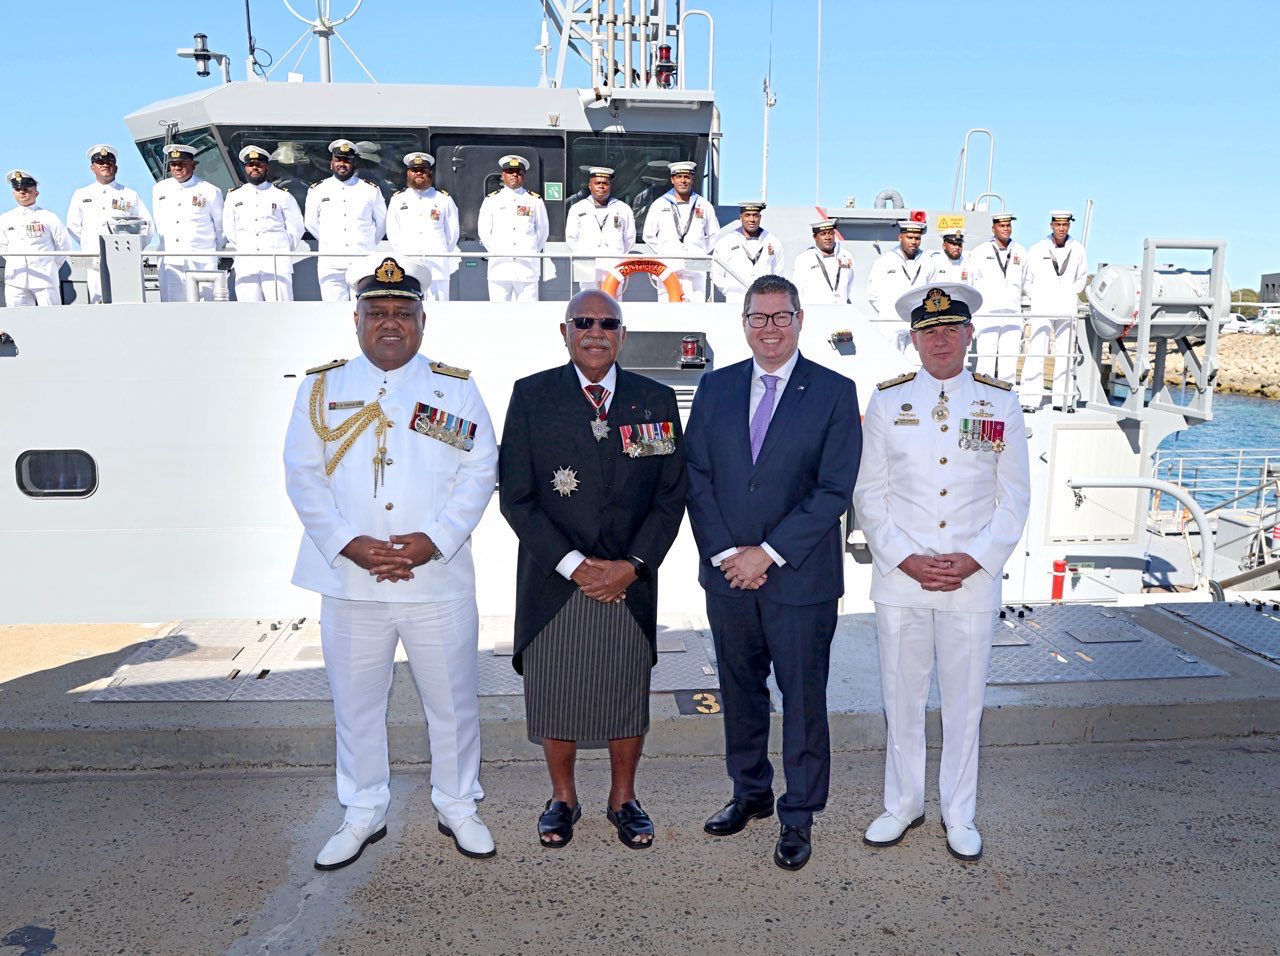 This ceremony marked the second new patrol boat delivered to Fiji under the Pacific Maritime Security Program & will continue the important work in upholding maritime security.